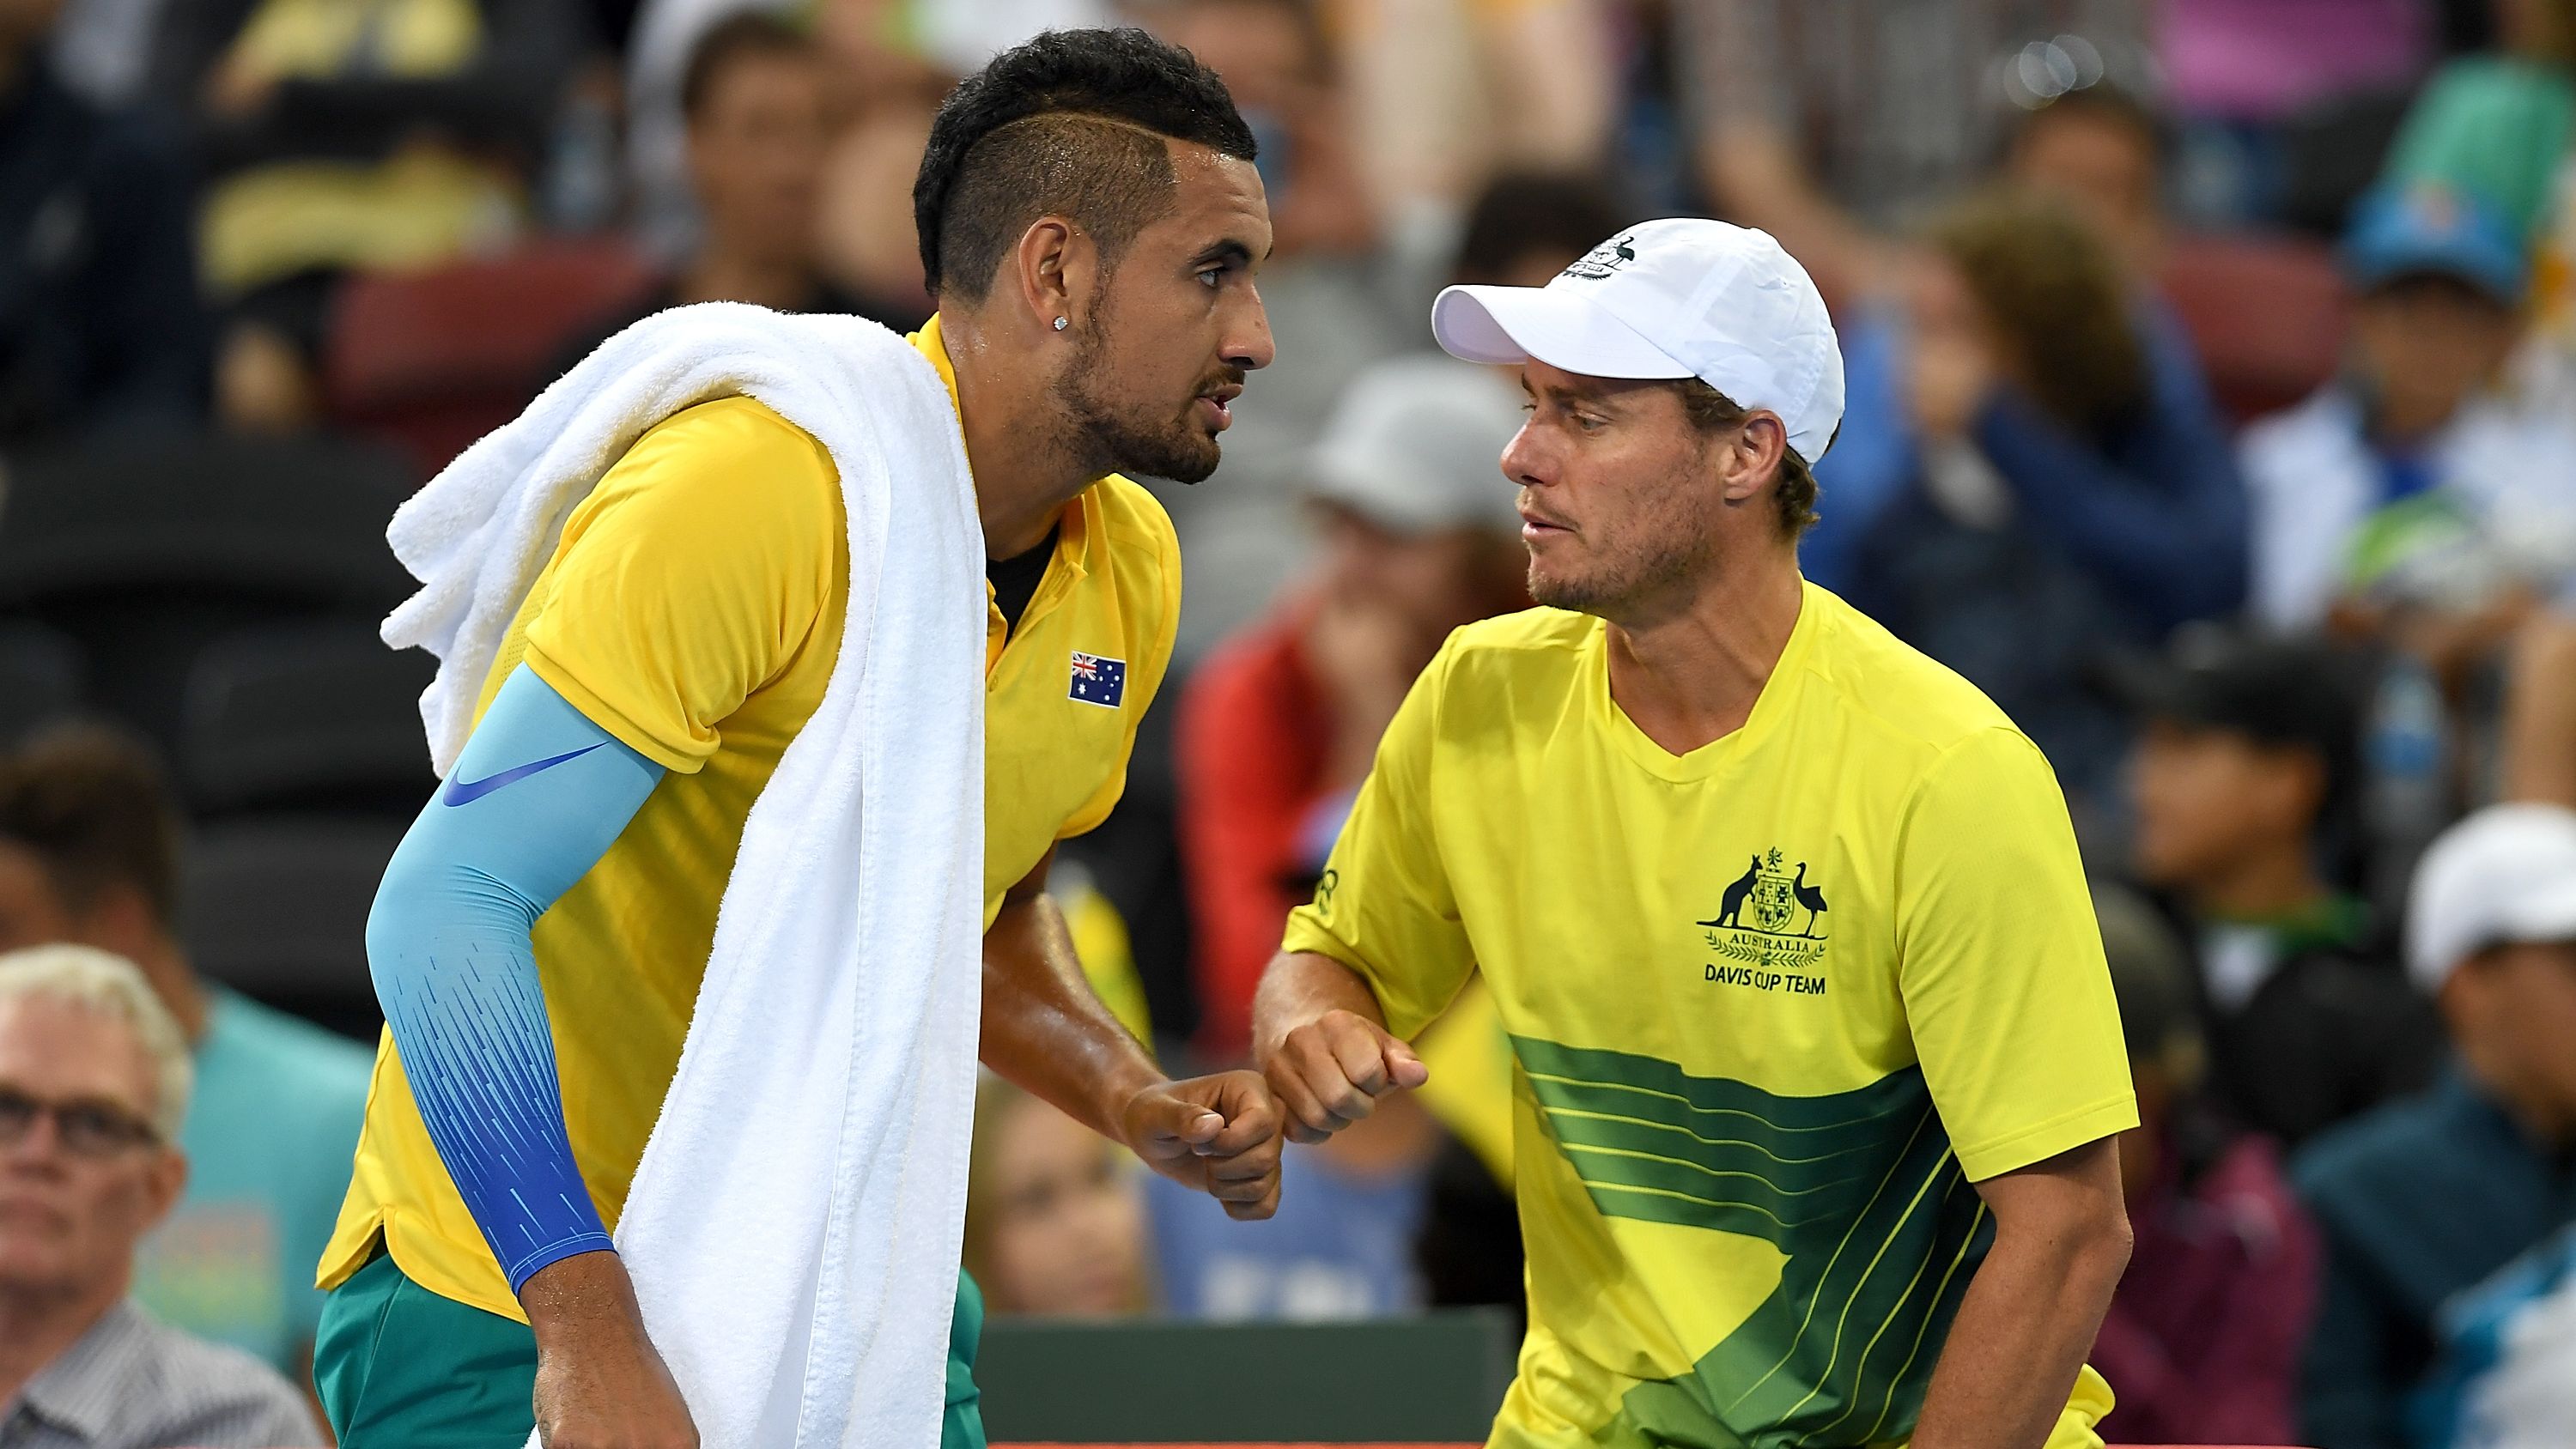 Australian team captain Lleyton Hewitt speaks to Nick Kyrgios during his singles match during the Davis Cup World Group First Round tie.